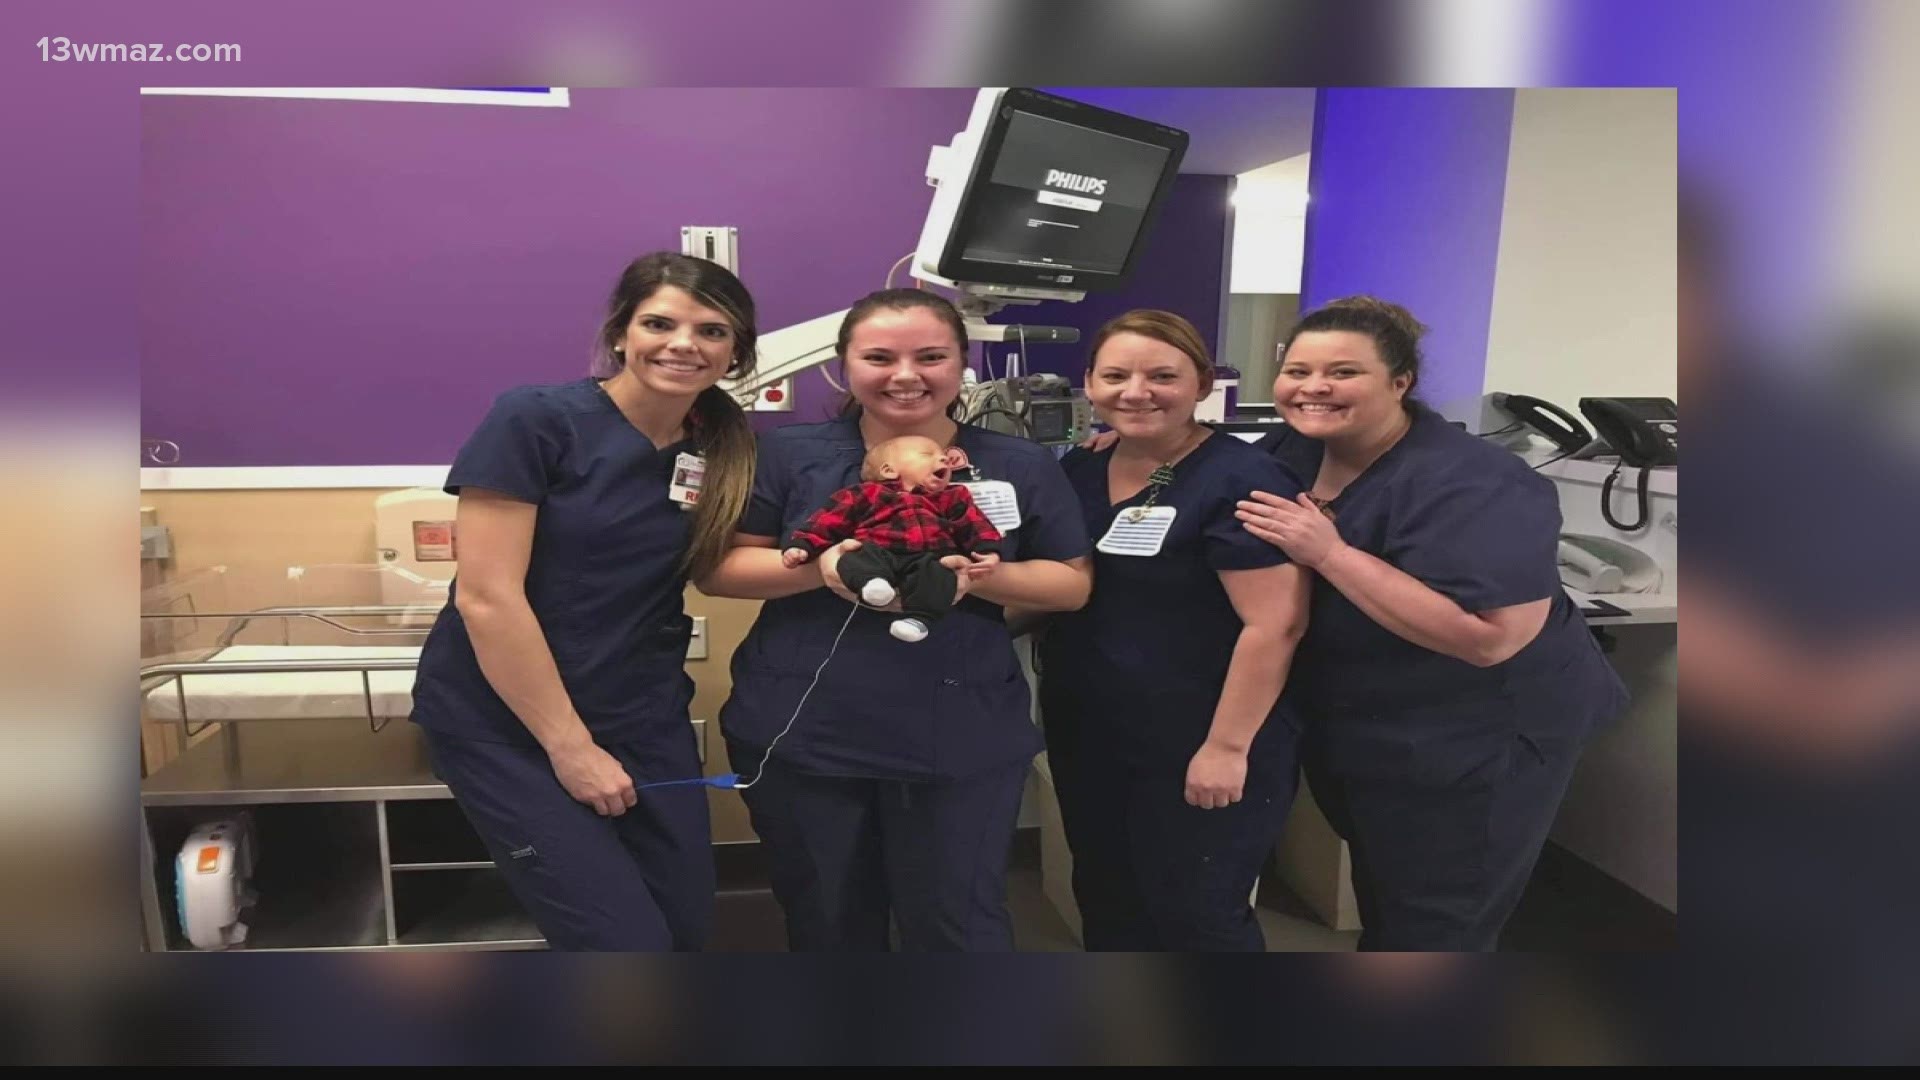 MOMS Club of Warner Robins is hosting a fundraiser to benefit premature babies at the Beverly Knight Olson Children's Hospital.